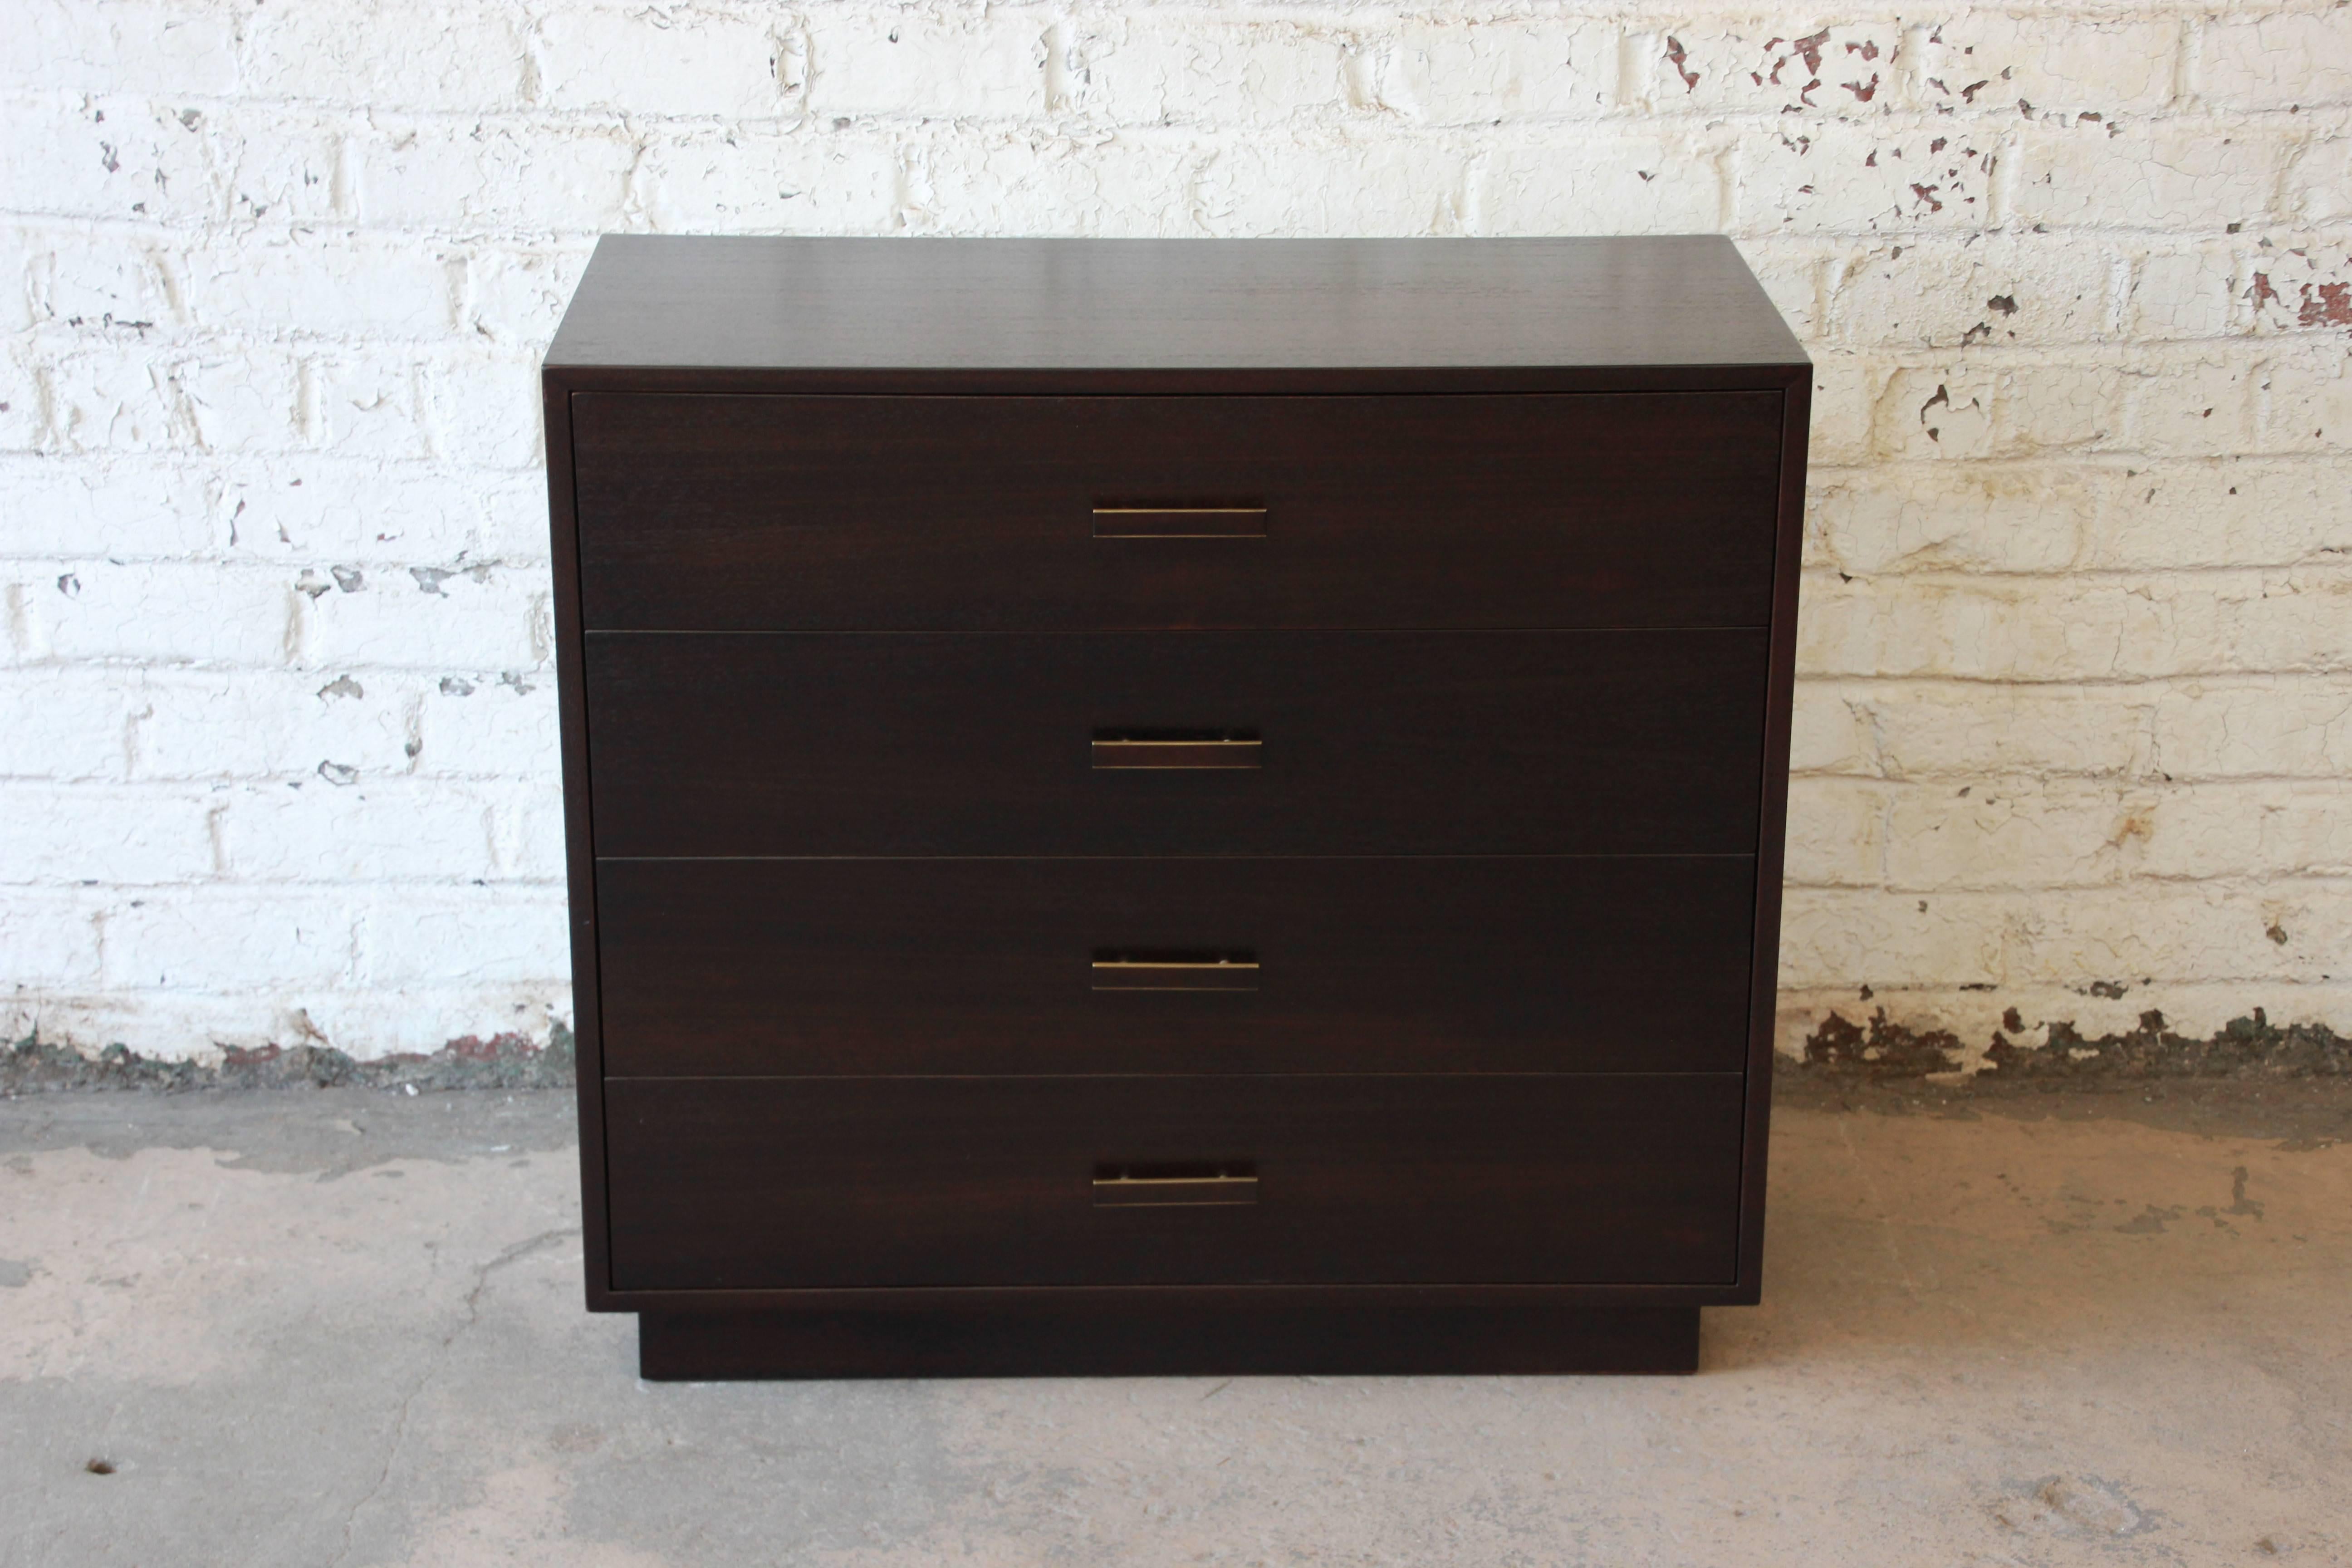 A stunning dark Mahogany and brass pulled gentlemen's chest by Harvey Probber. The chest has been restored and refinished in a dark mahogany. It offers four identical drawers with the top drawer offering dividers. The chest has a plinth base and